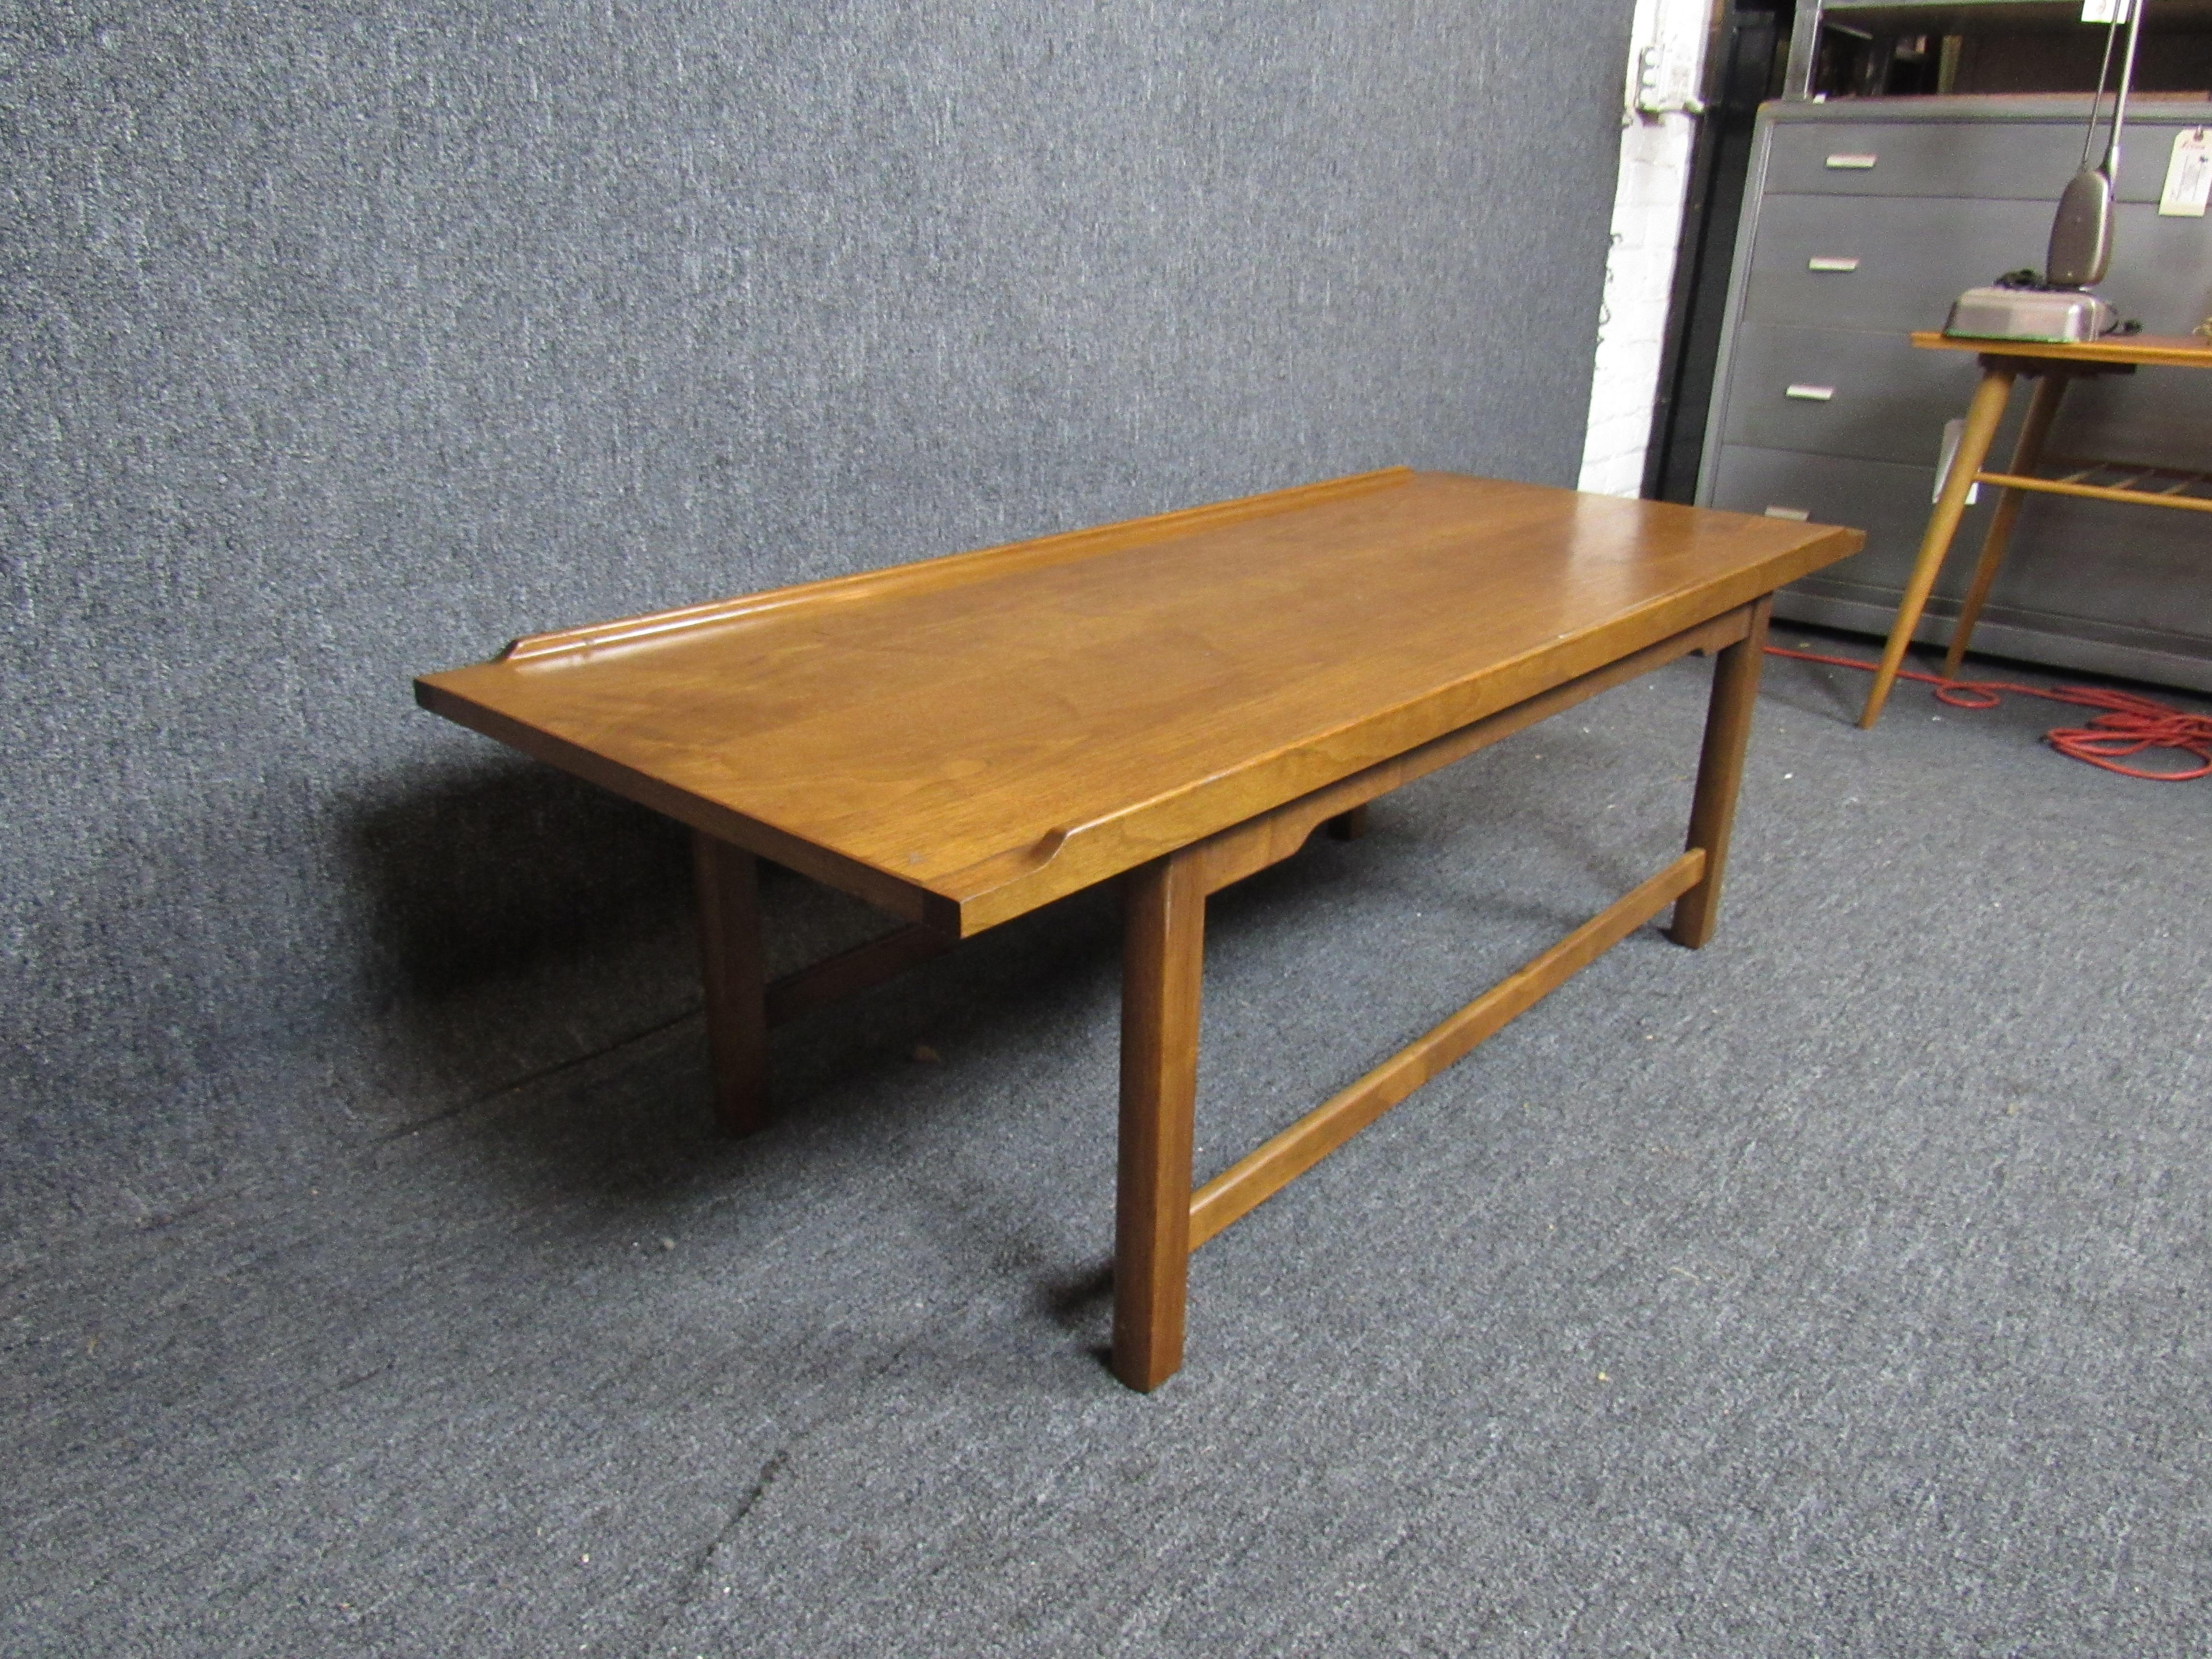 Beautiful mid-century coffee table made by the Drexel furniture company in North Carolina. An ample tabletop with sculpted raised edges highlight the wood's warm, natural grains. A very versatile table sure to tie together any home or office.